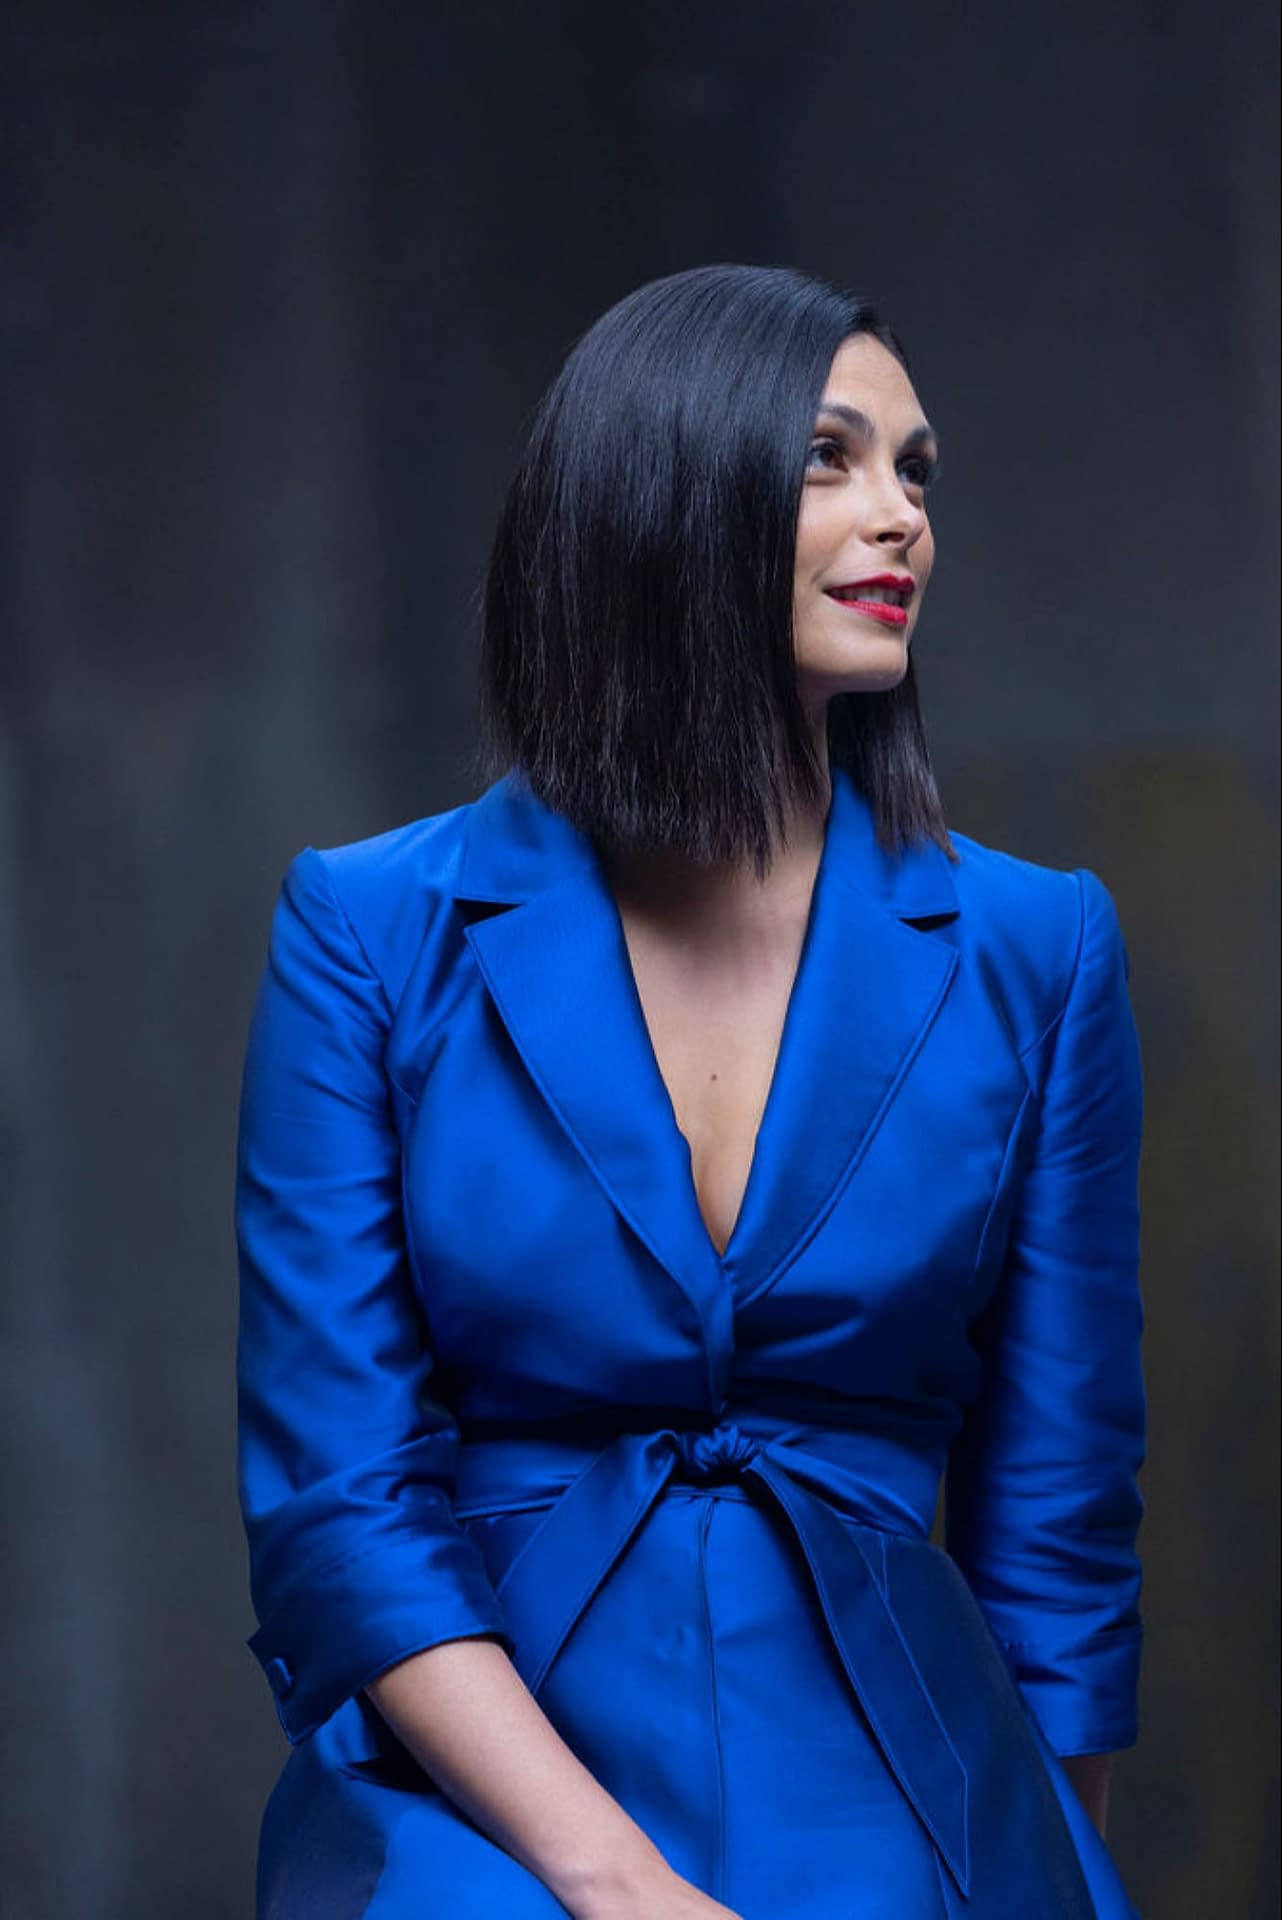 Review: Morena Baccarin Brings 'The Endgame' to Life